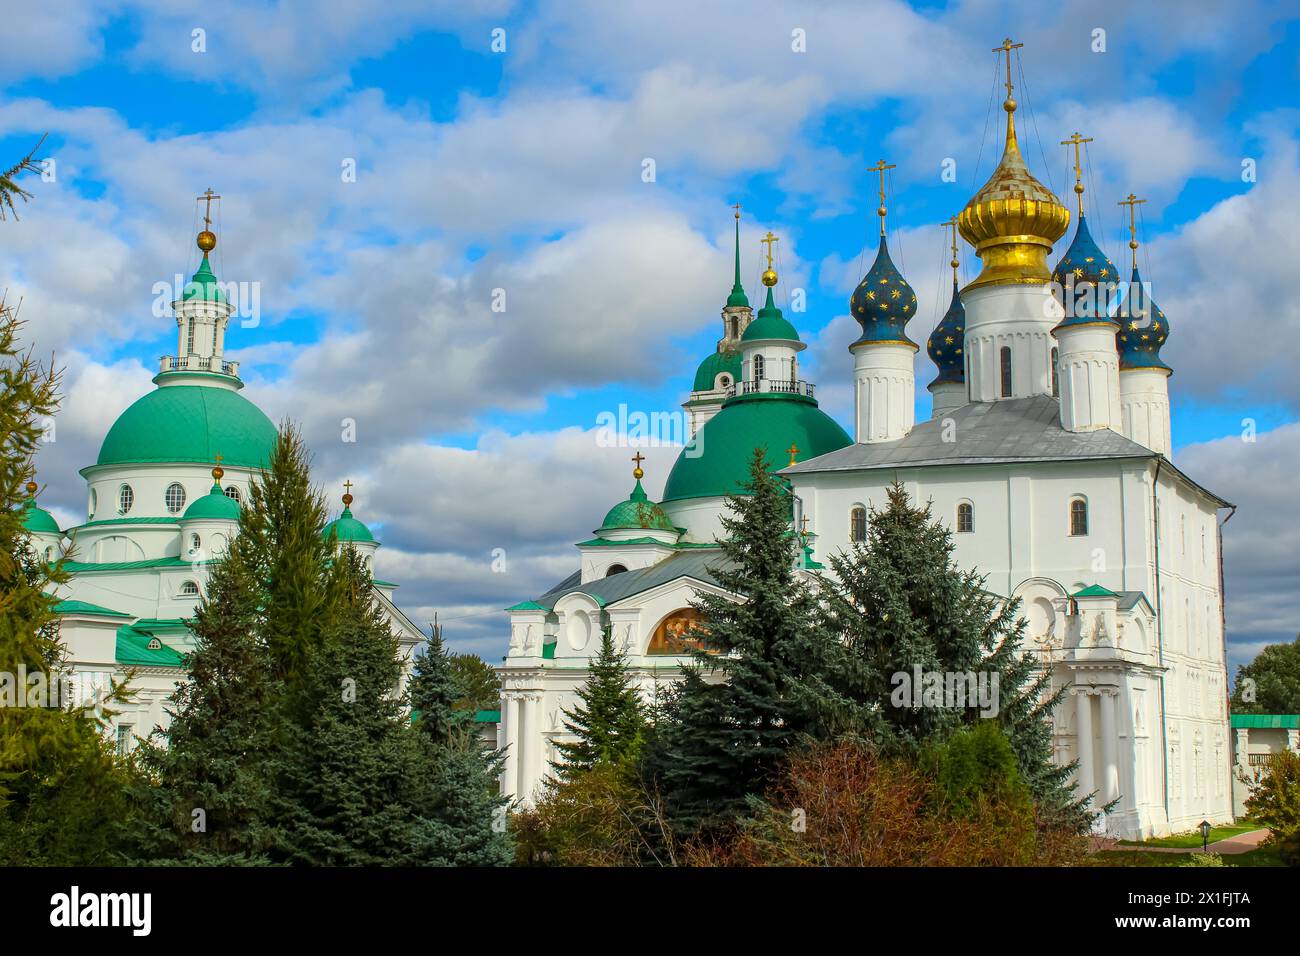 View of the temples of the Spaso-Yakovlevsky Monastery on a sunny winter day. Rostov Veliky, Russia Stock Photo